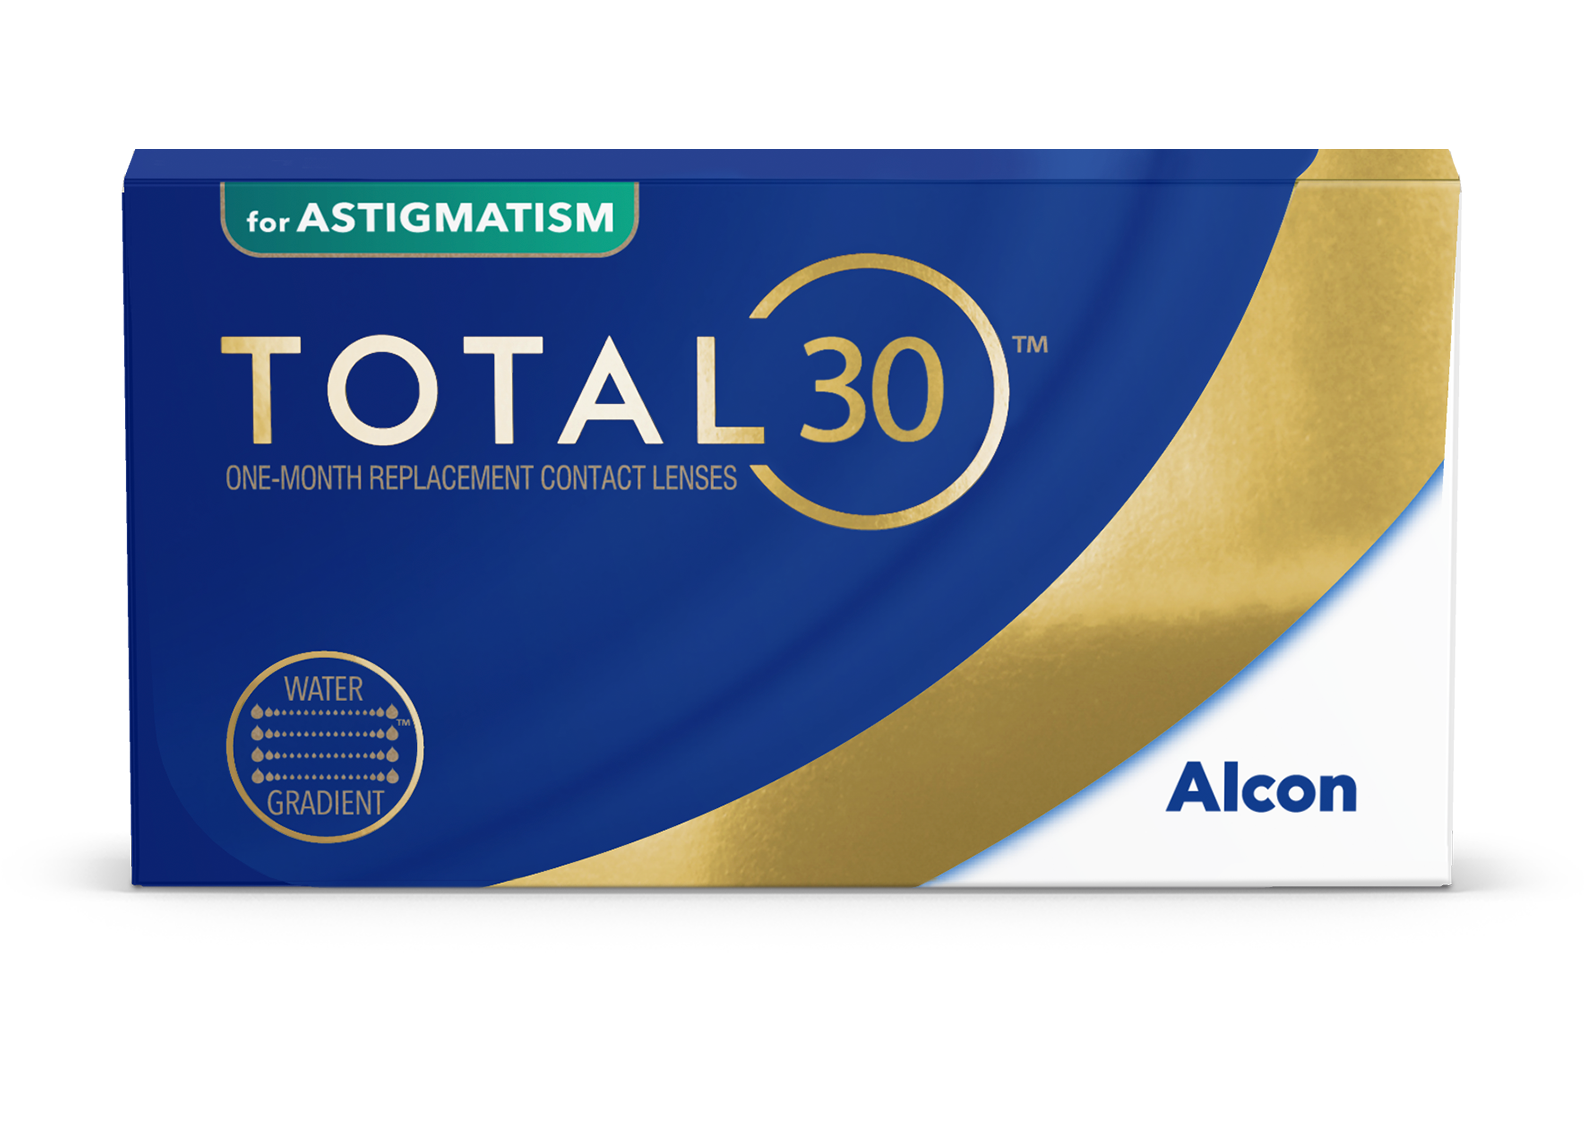 alcon-to-launch-total30-toric-contact-lens